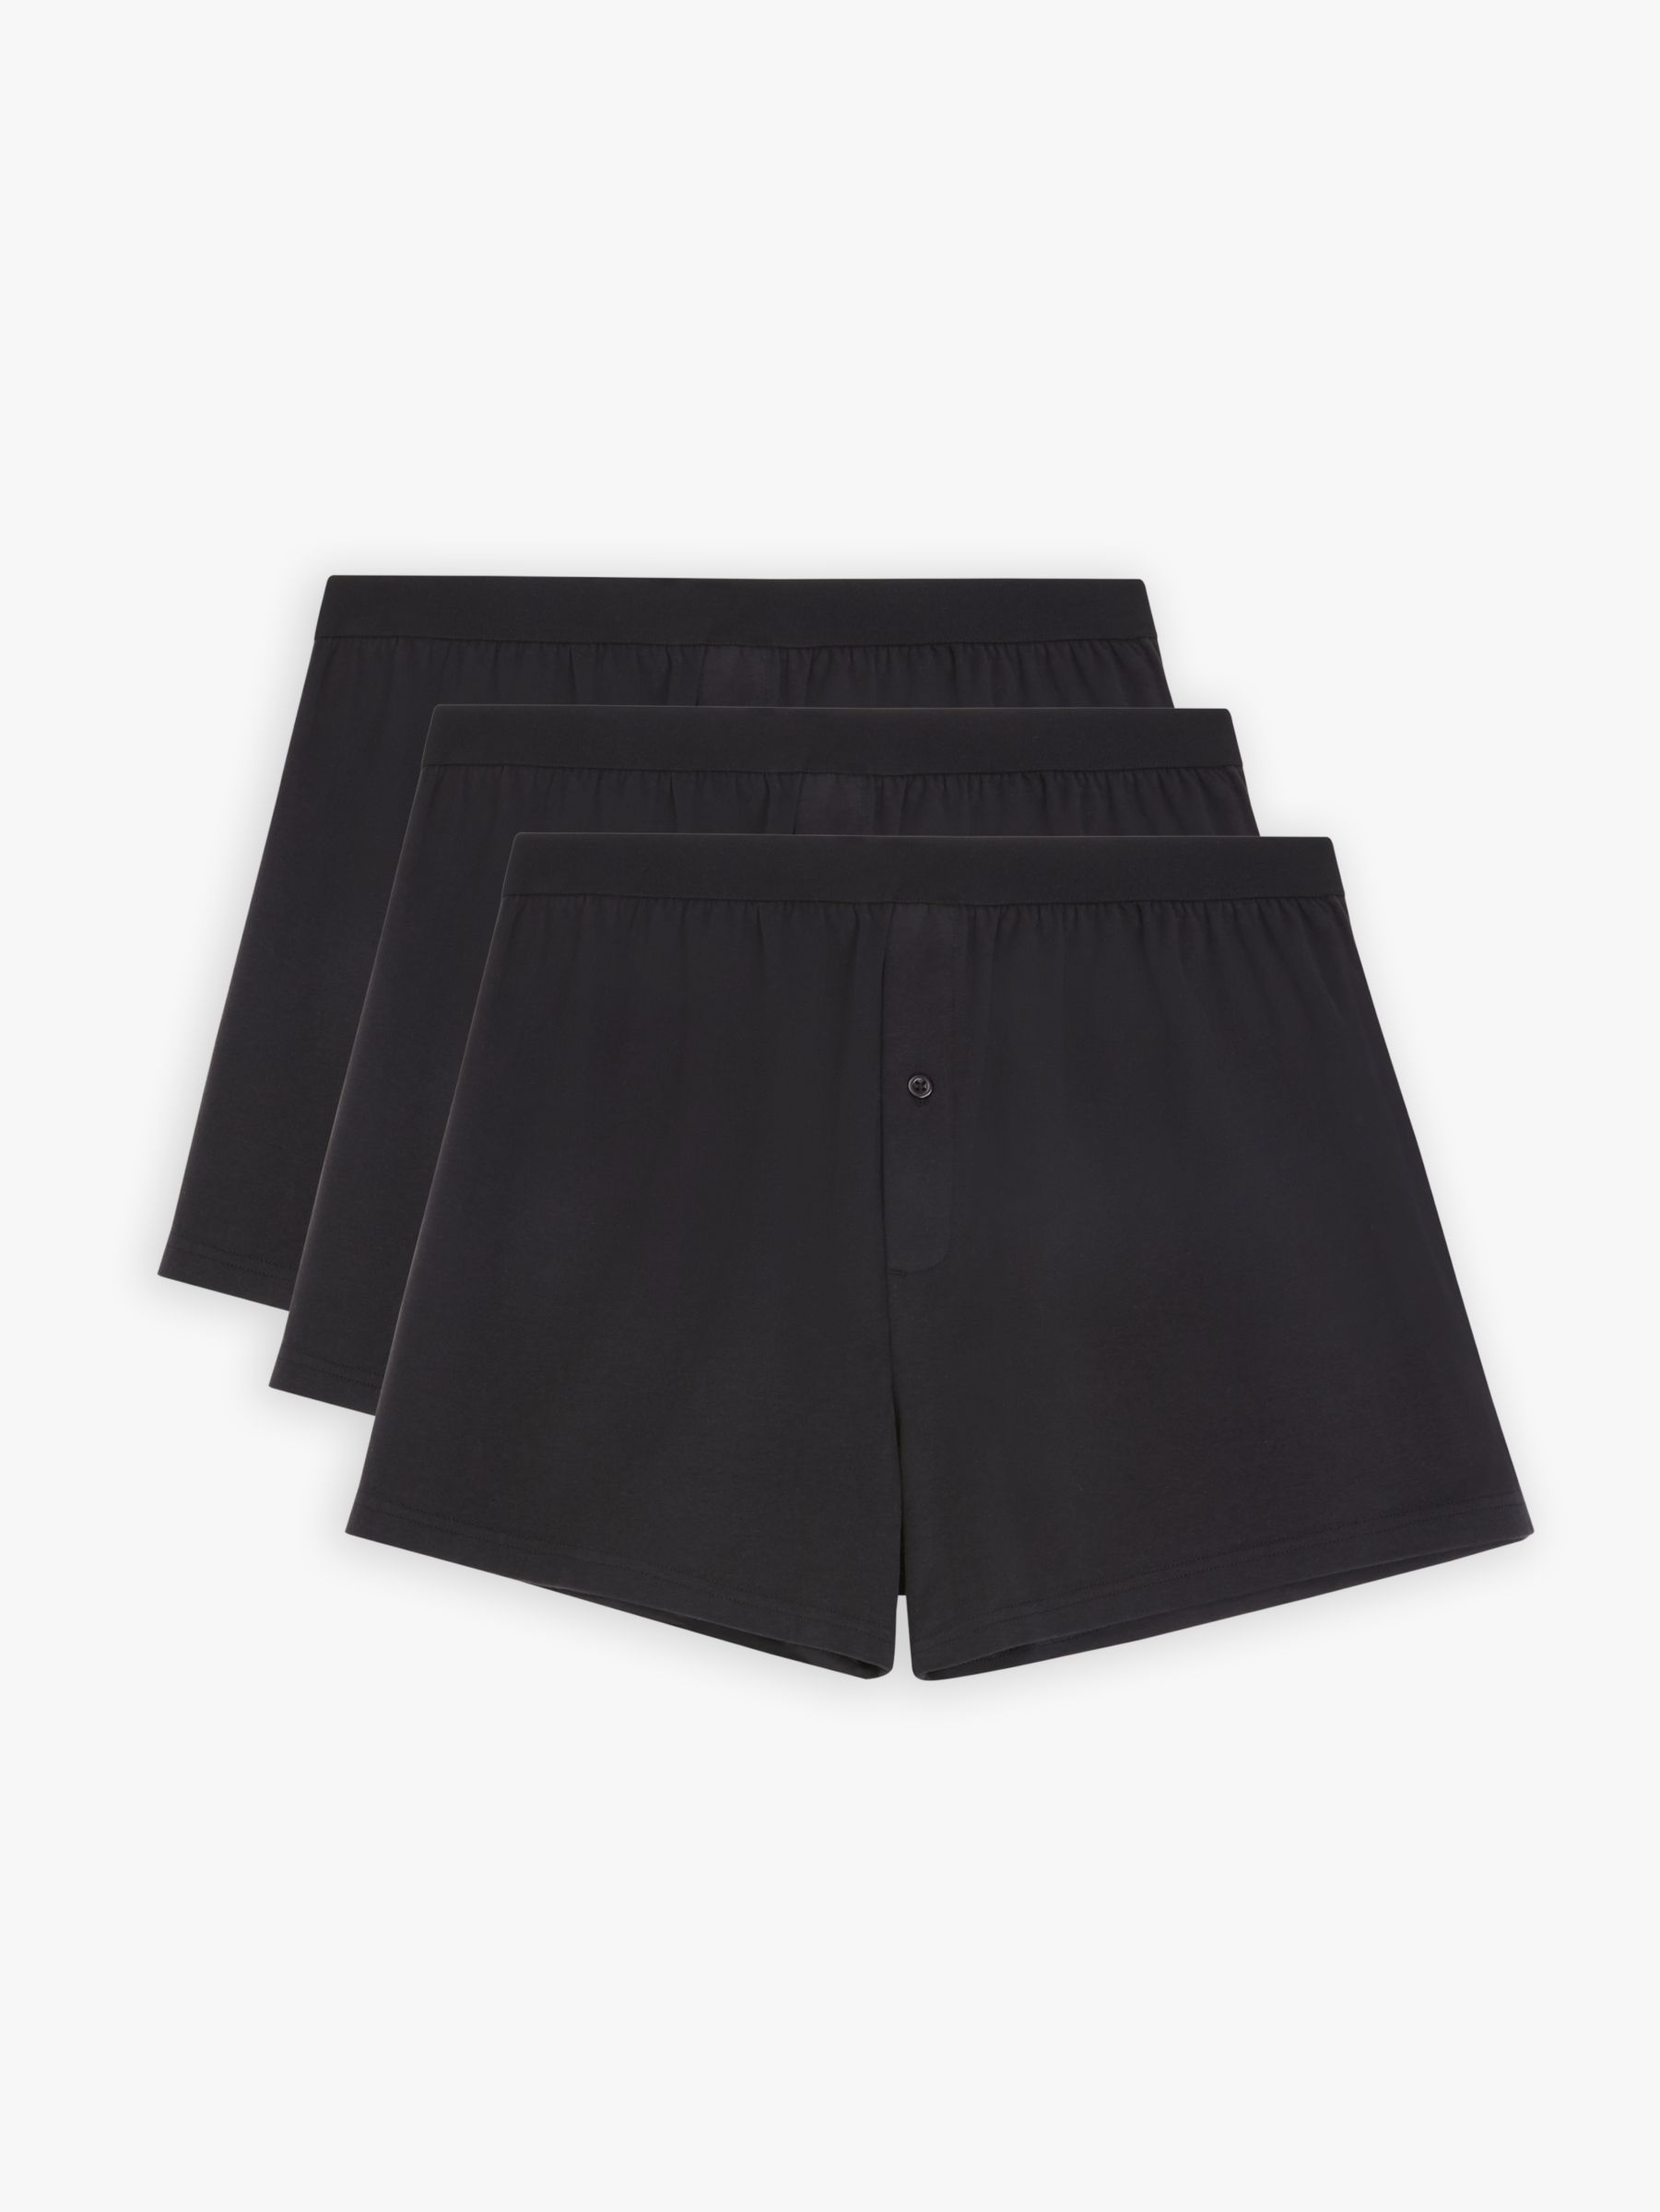 John Lewis ANYDAY Jersey Boxers, Pack of 3, Black, S